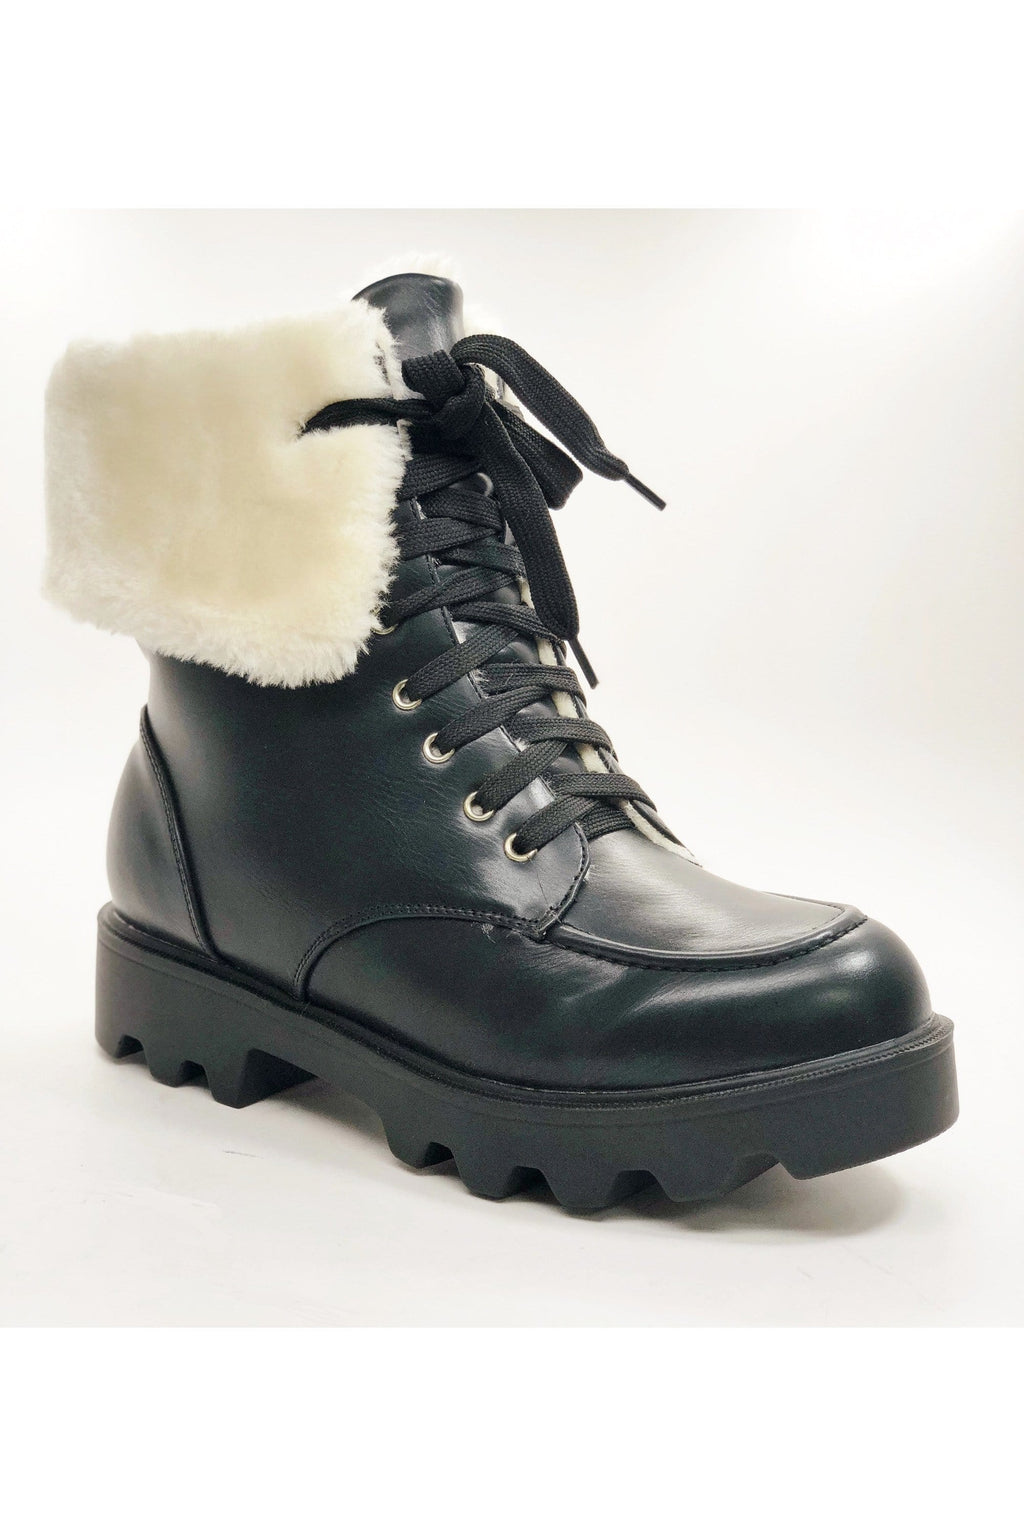 N.Y.L.A. SHOES 6 / BLACK N.Y.L.A. Shoes Wully Lace Up Combat Boots with Faux Fur Collar in Black